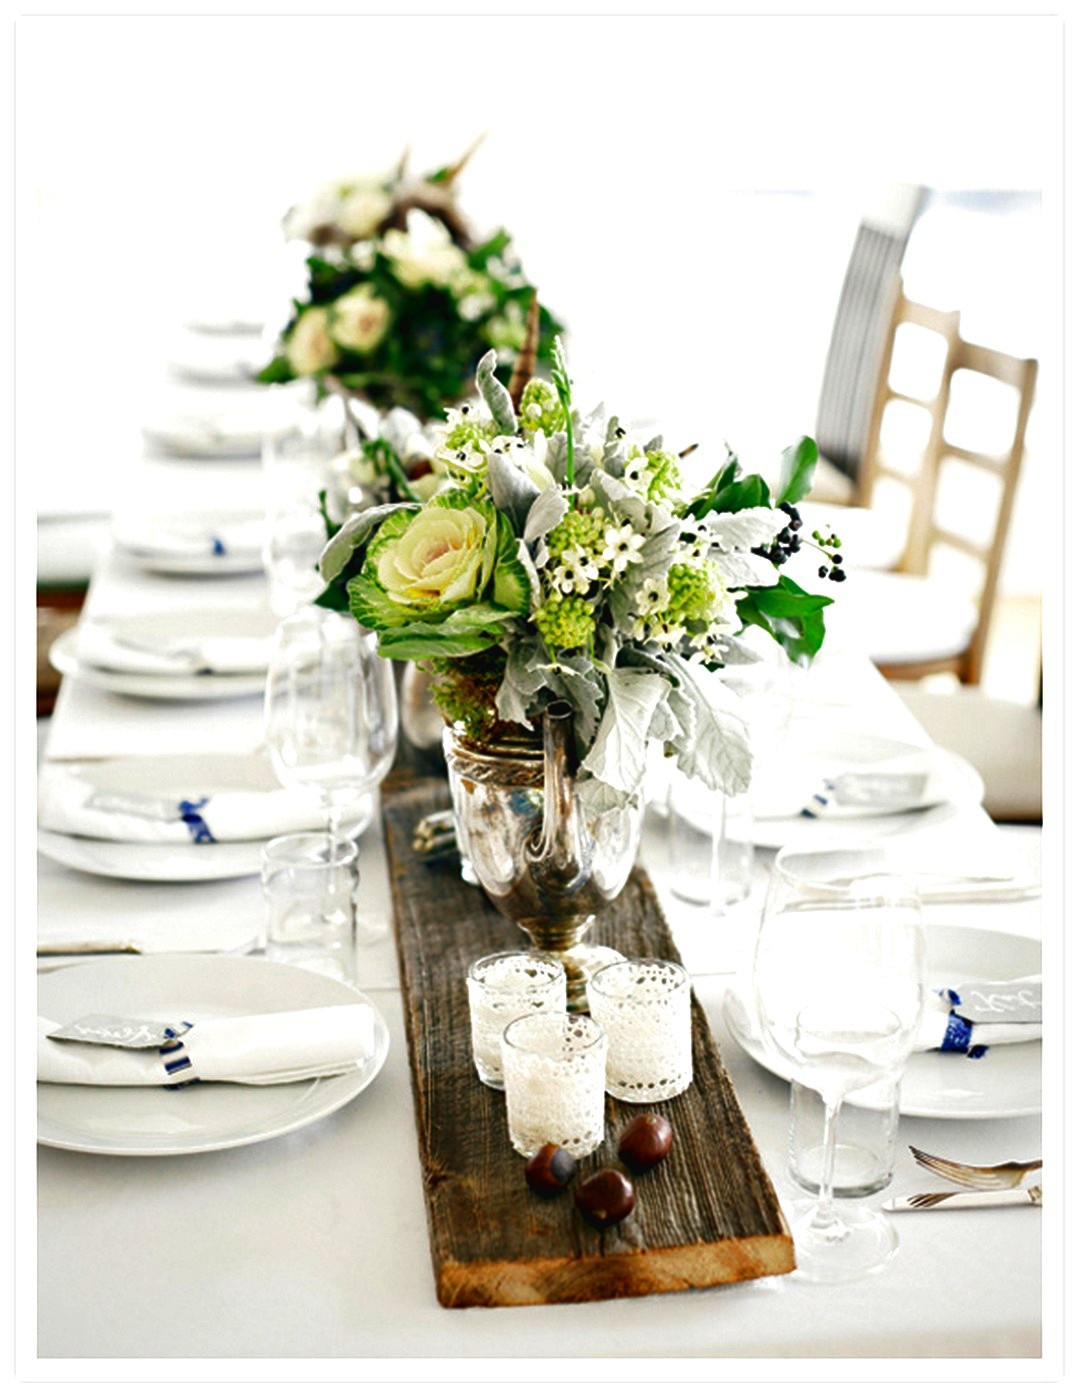 Wood Rustic Wedding Party Table Decoration Ideas